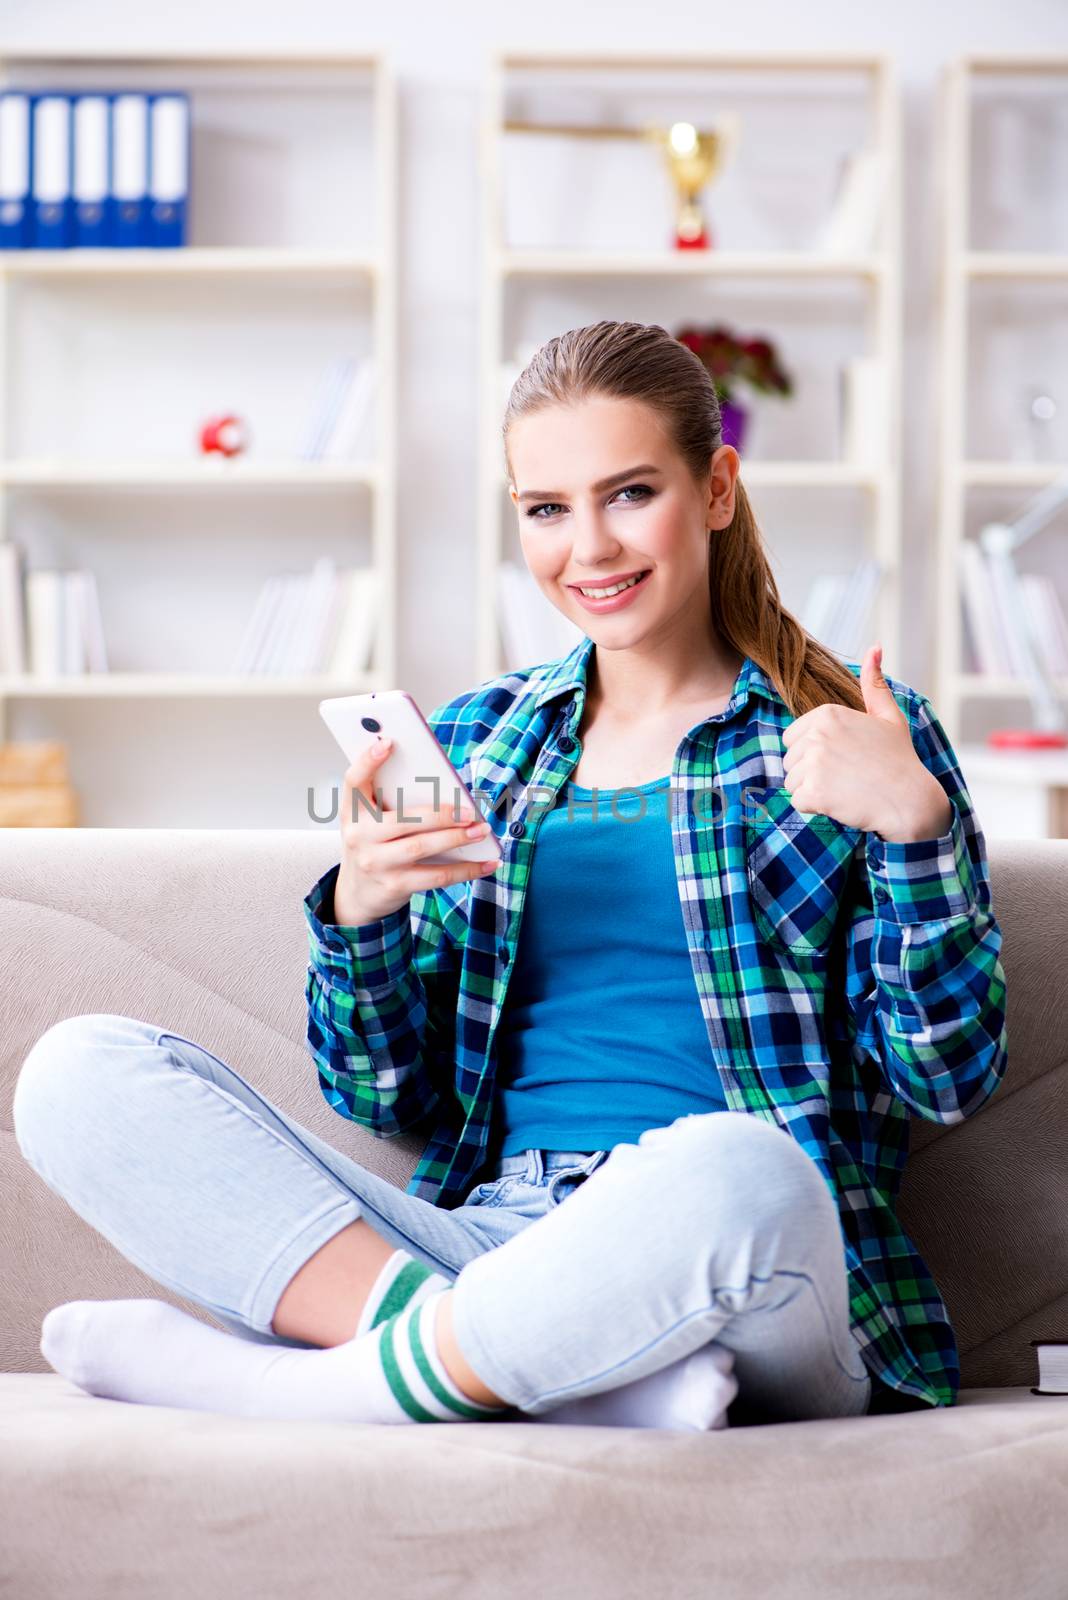 Female student sitting on the sofa with mobile